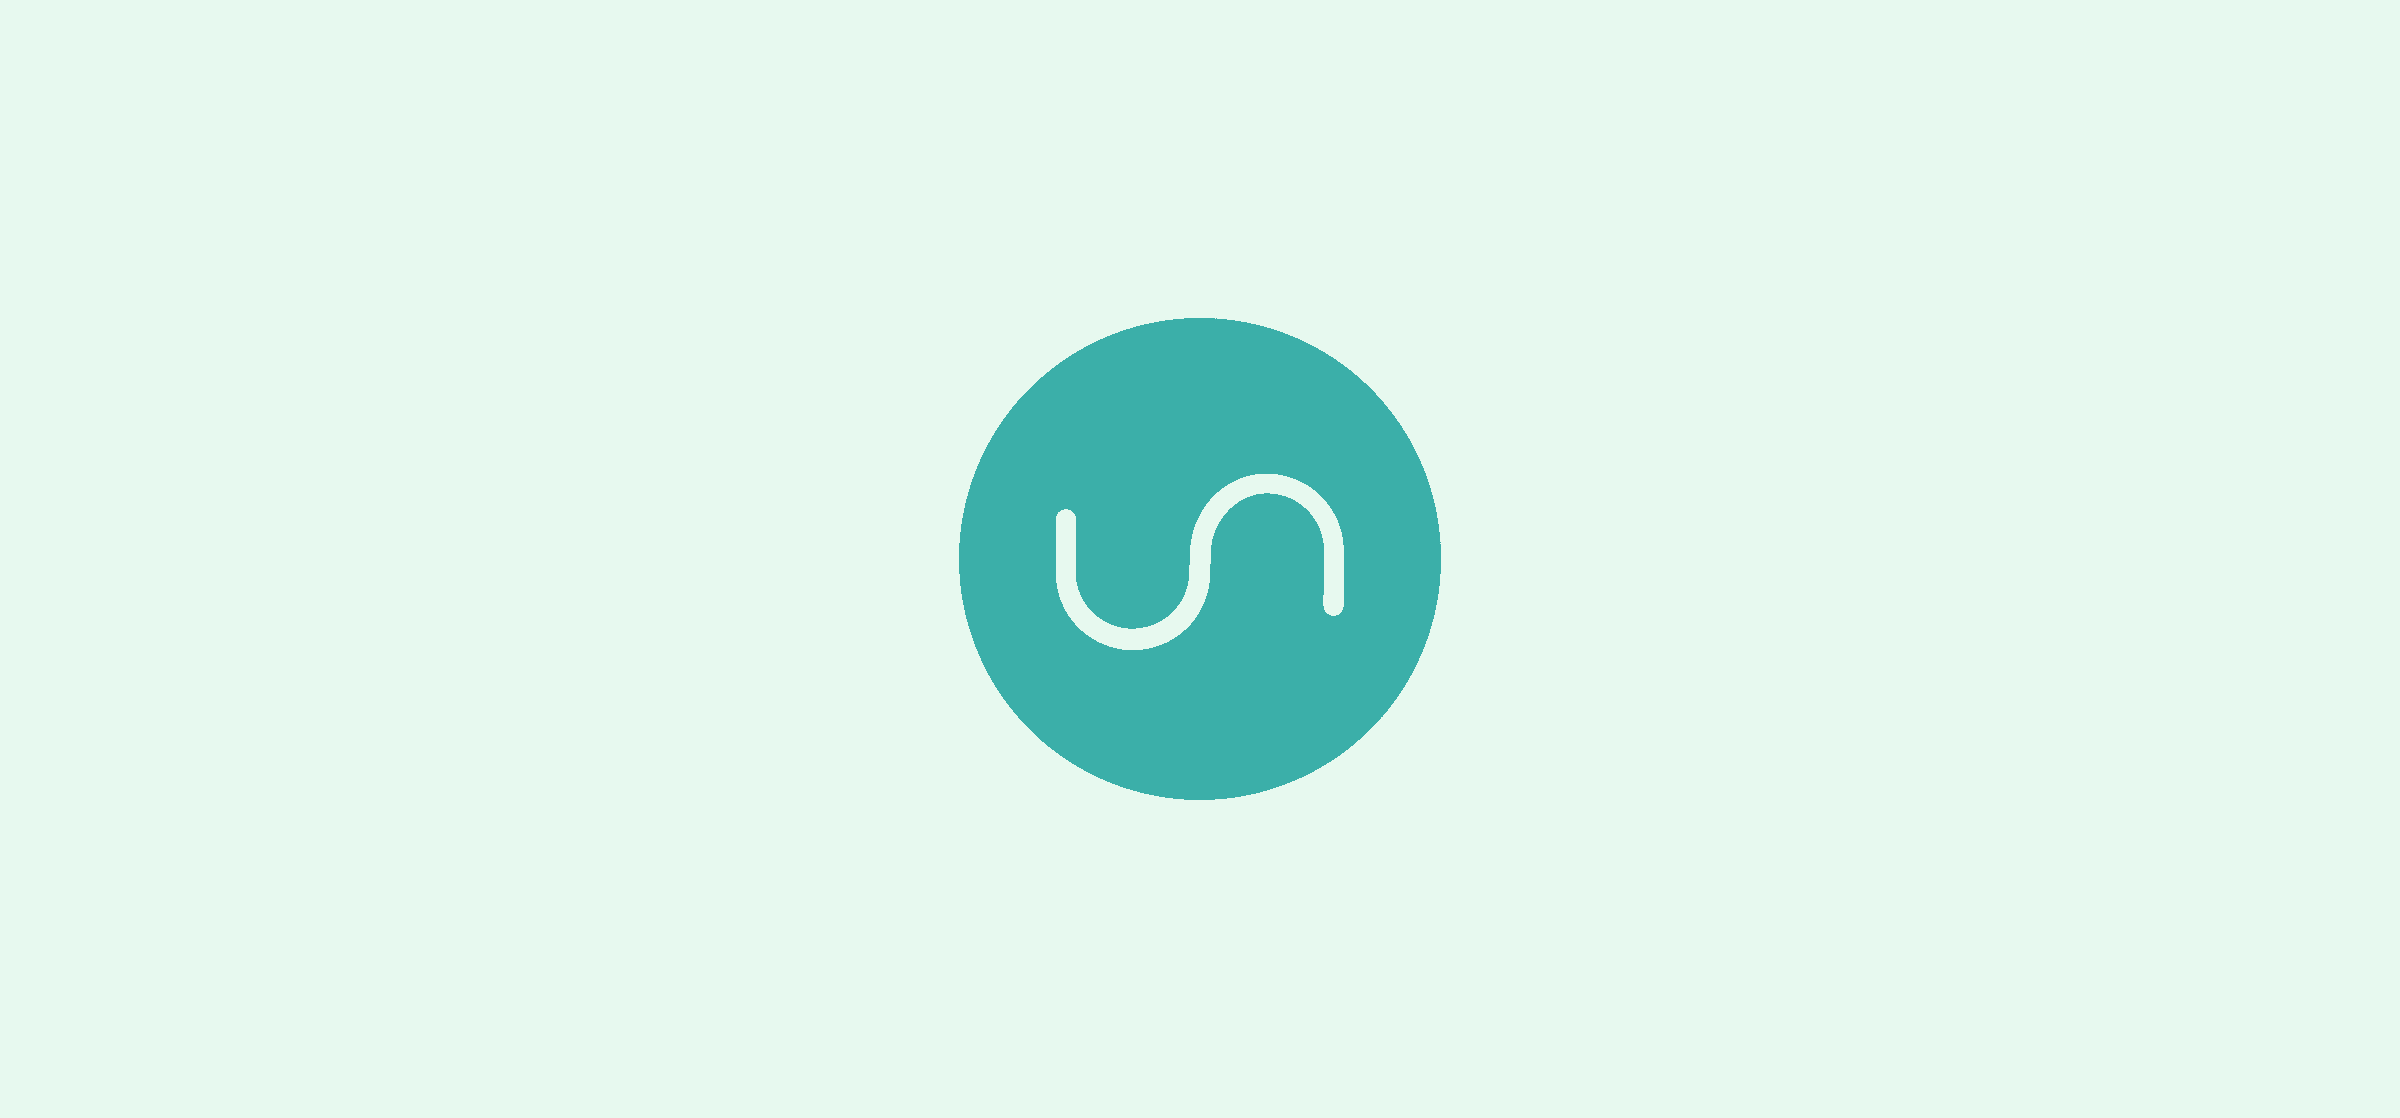 The Unito logo on a pale green background.